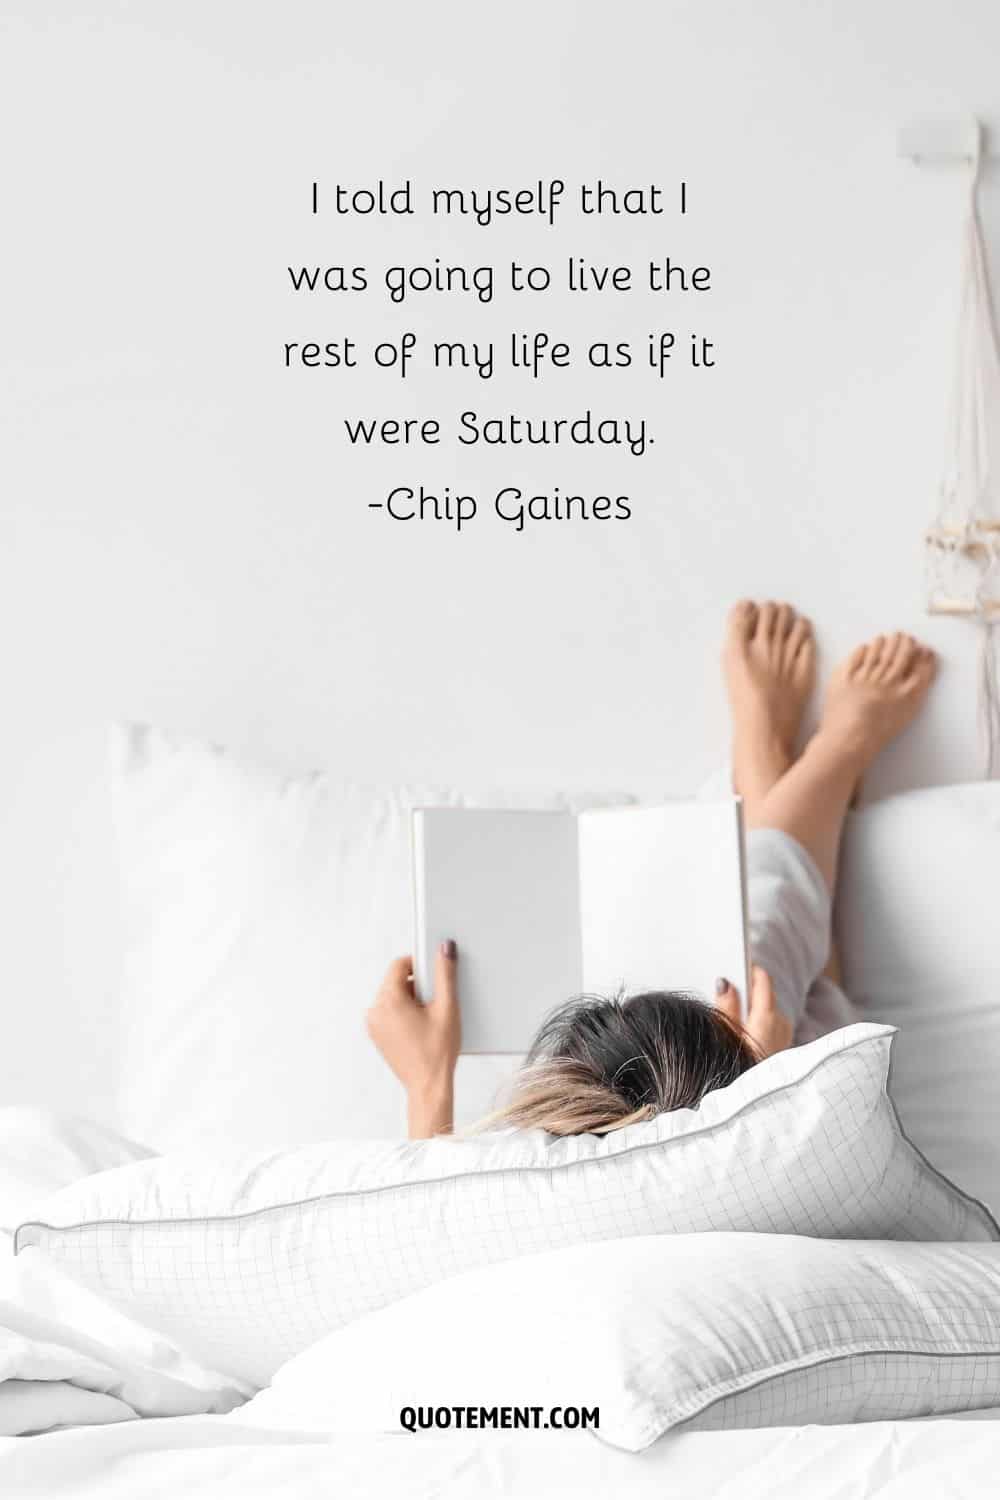 I told myself that I was going to live the rest of my life as if it were Saturday